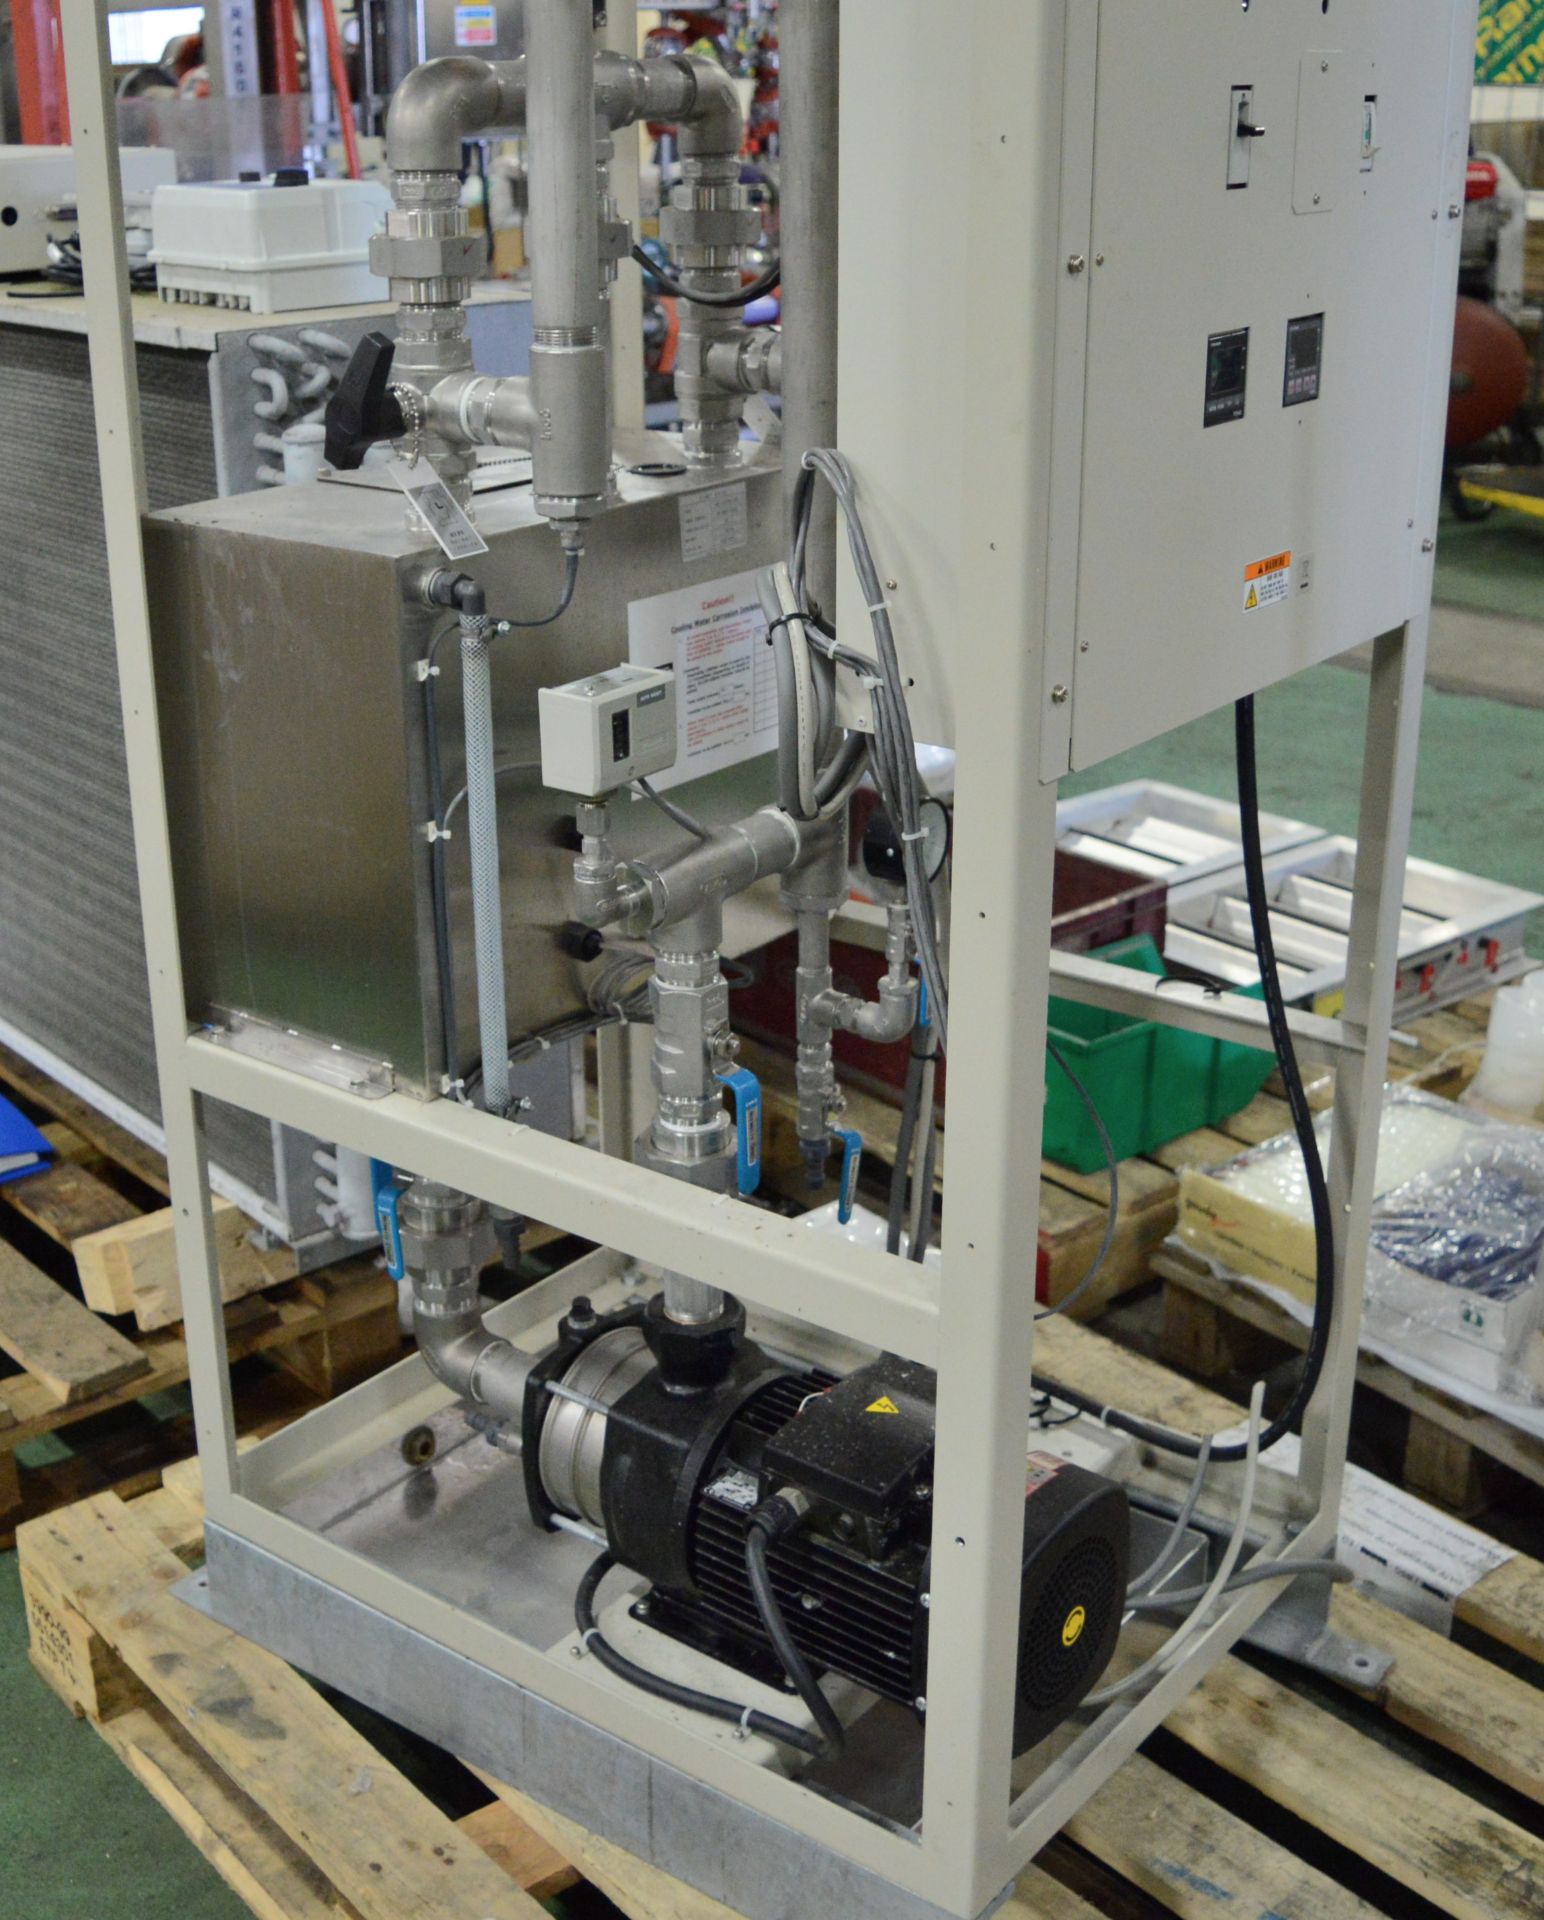 Grundfos CH8-60 1880W Pump, Stainless Steel Pipework, Control Panel - All in frame. - Image 2 of 3